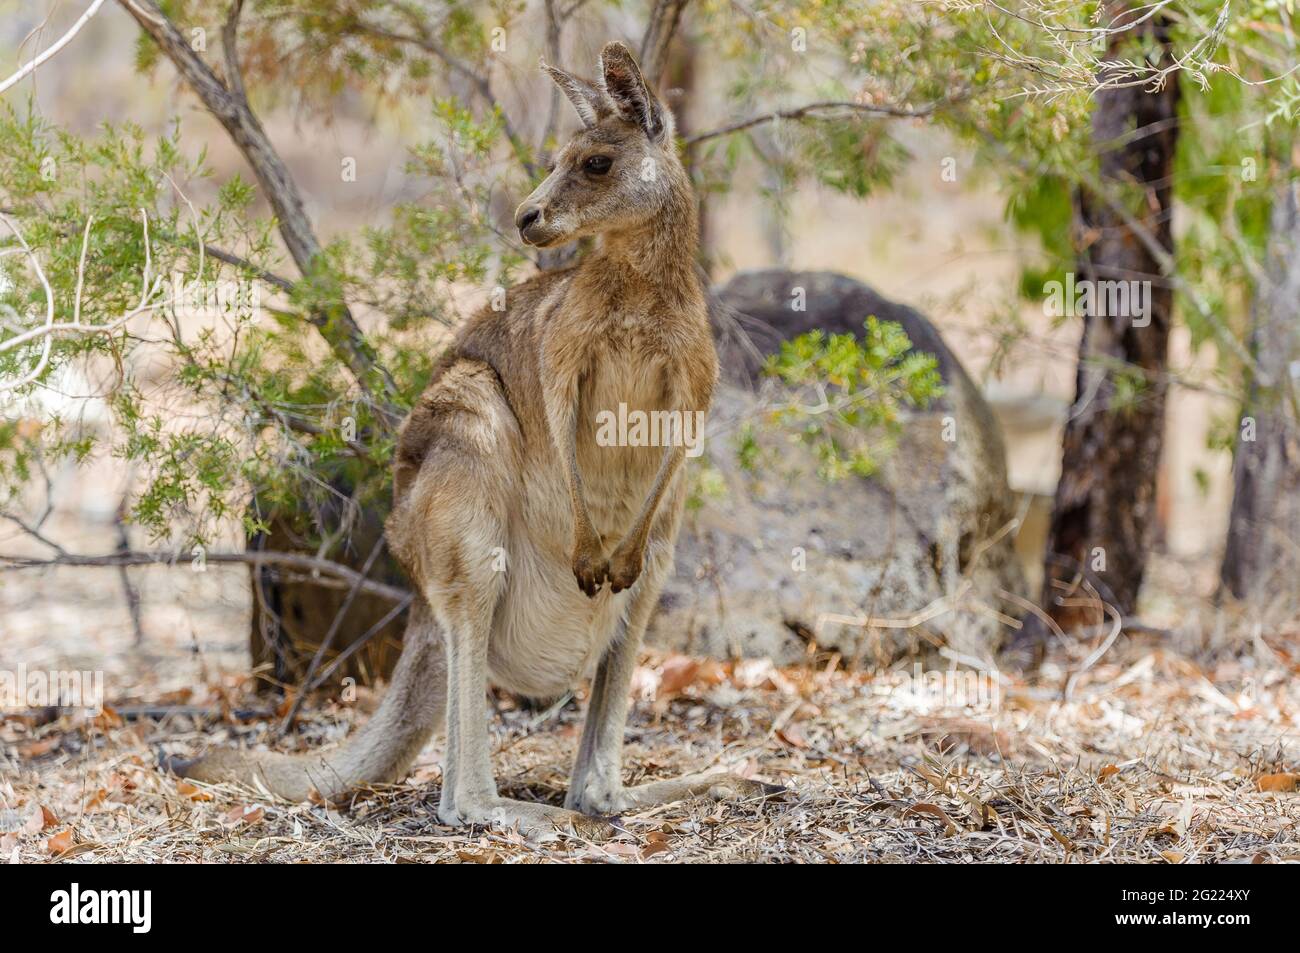 A single eastern grey kangaroo stands in some scrub land prior to getting a drink from a small waterhole at Undarra, Queensland in Australia. Stock Photo